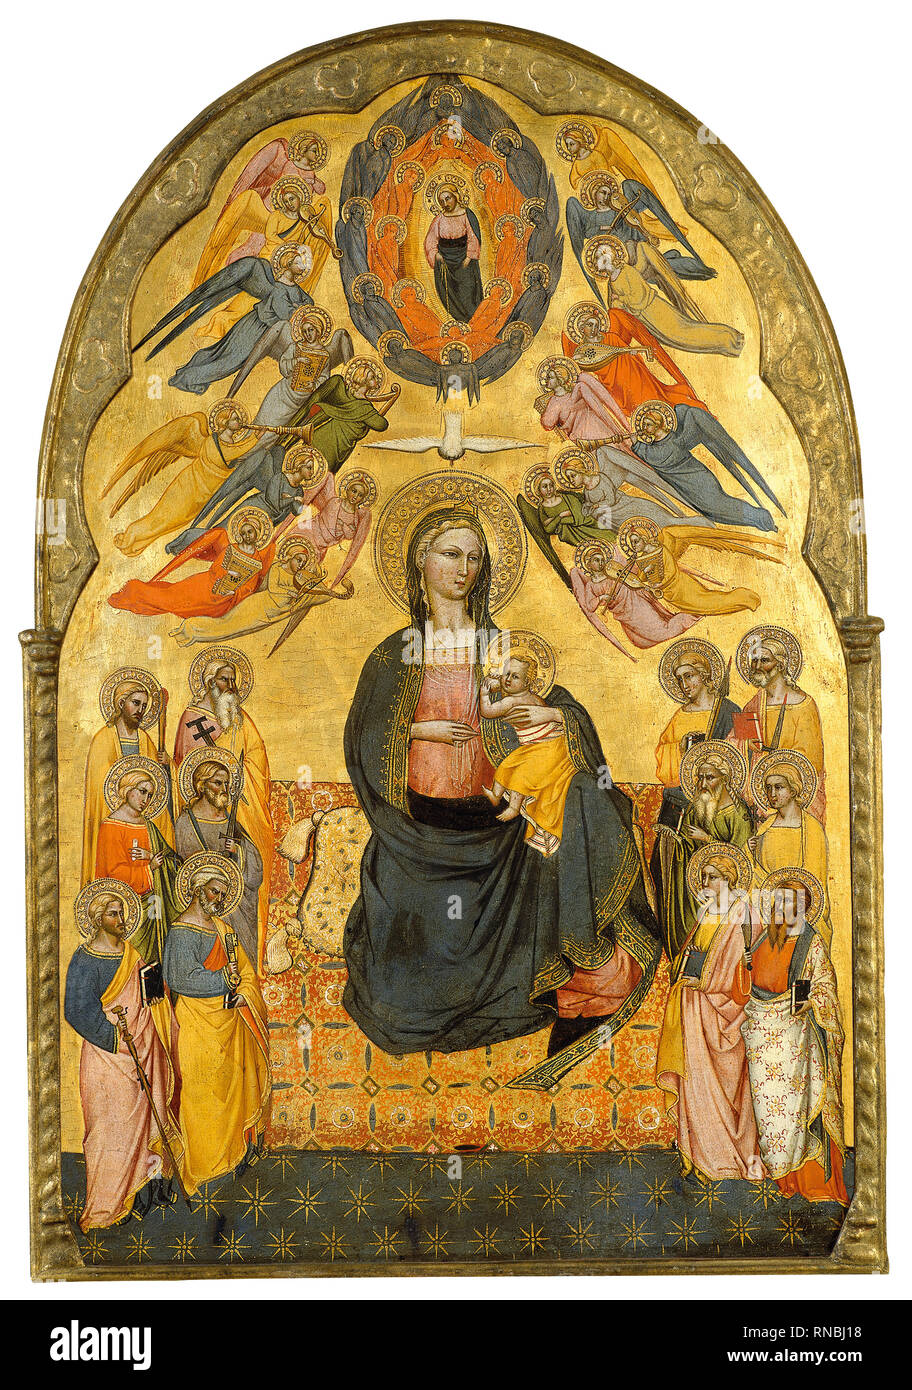 Cenni di Francesco di Ser Cenni (Active in Florence 1369-ca. 1415). The Virgin of Humility with the Holy Father, the Holy Spirit and the twelve Apostles (ca. 1375 - 1380). Tempera and gold on panel. 76.6 x 51.2 cm. Museum: Museu Nacional d'Art de Catalunya (MNAC). Stock Photo